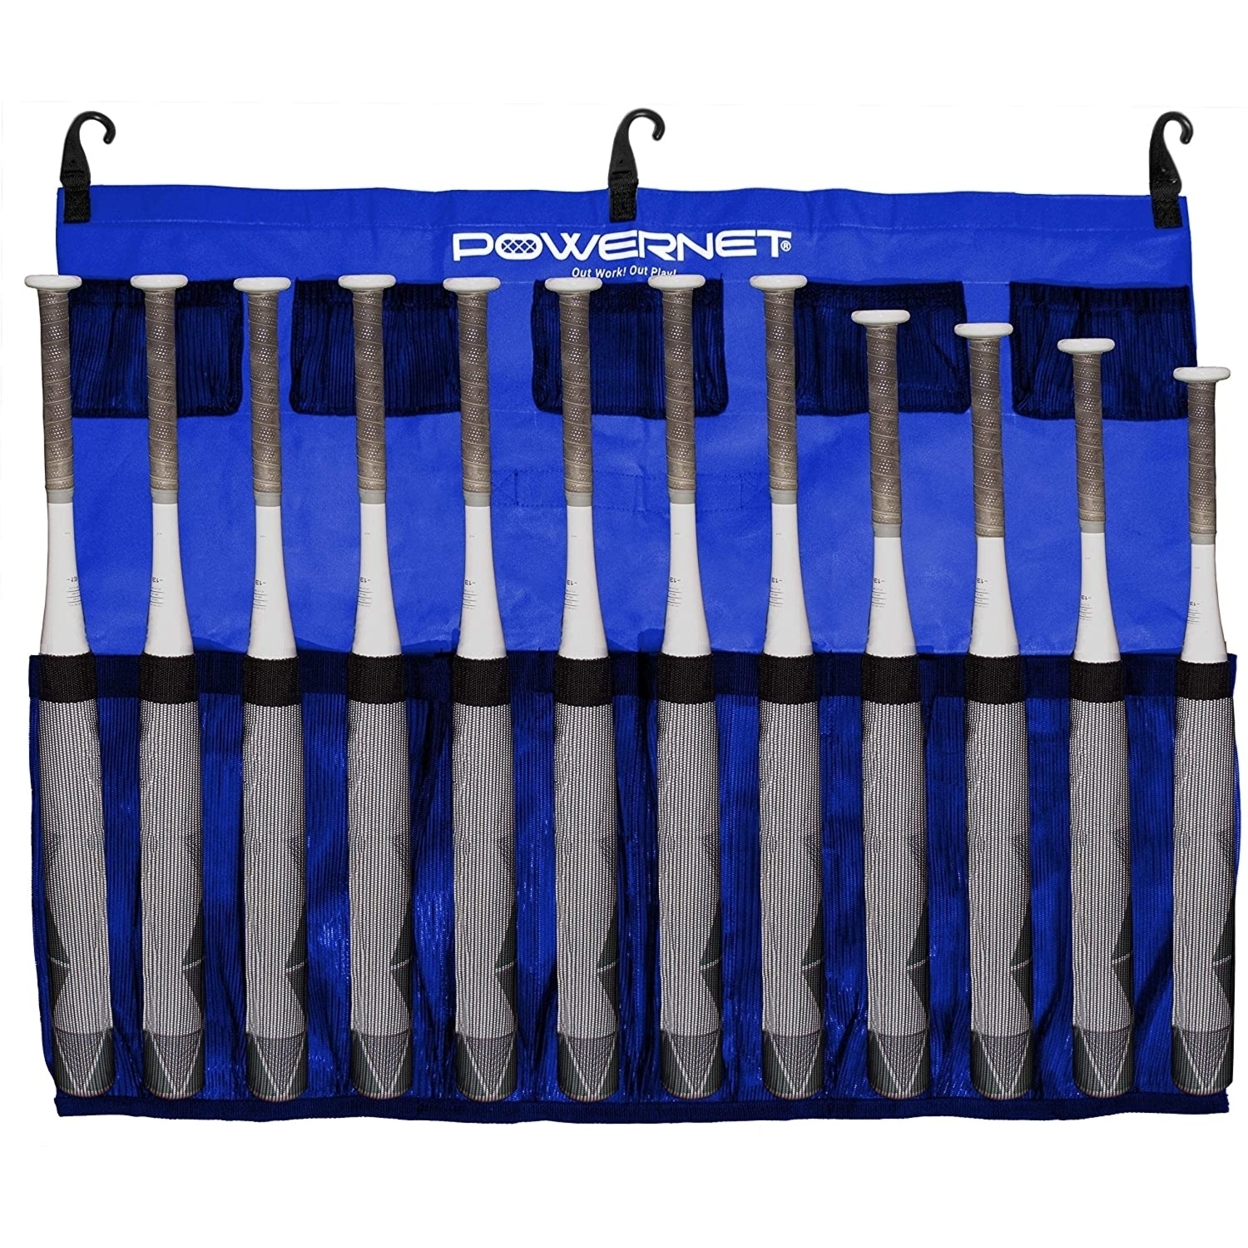 PowerNet Hanging Bat Bag Caddy For Hanging Up To 12 Bats On Fence (1169) - Royal Blue